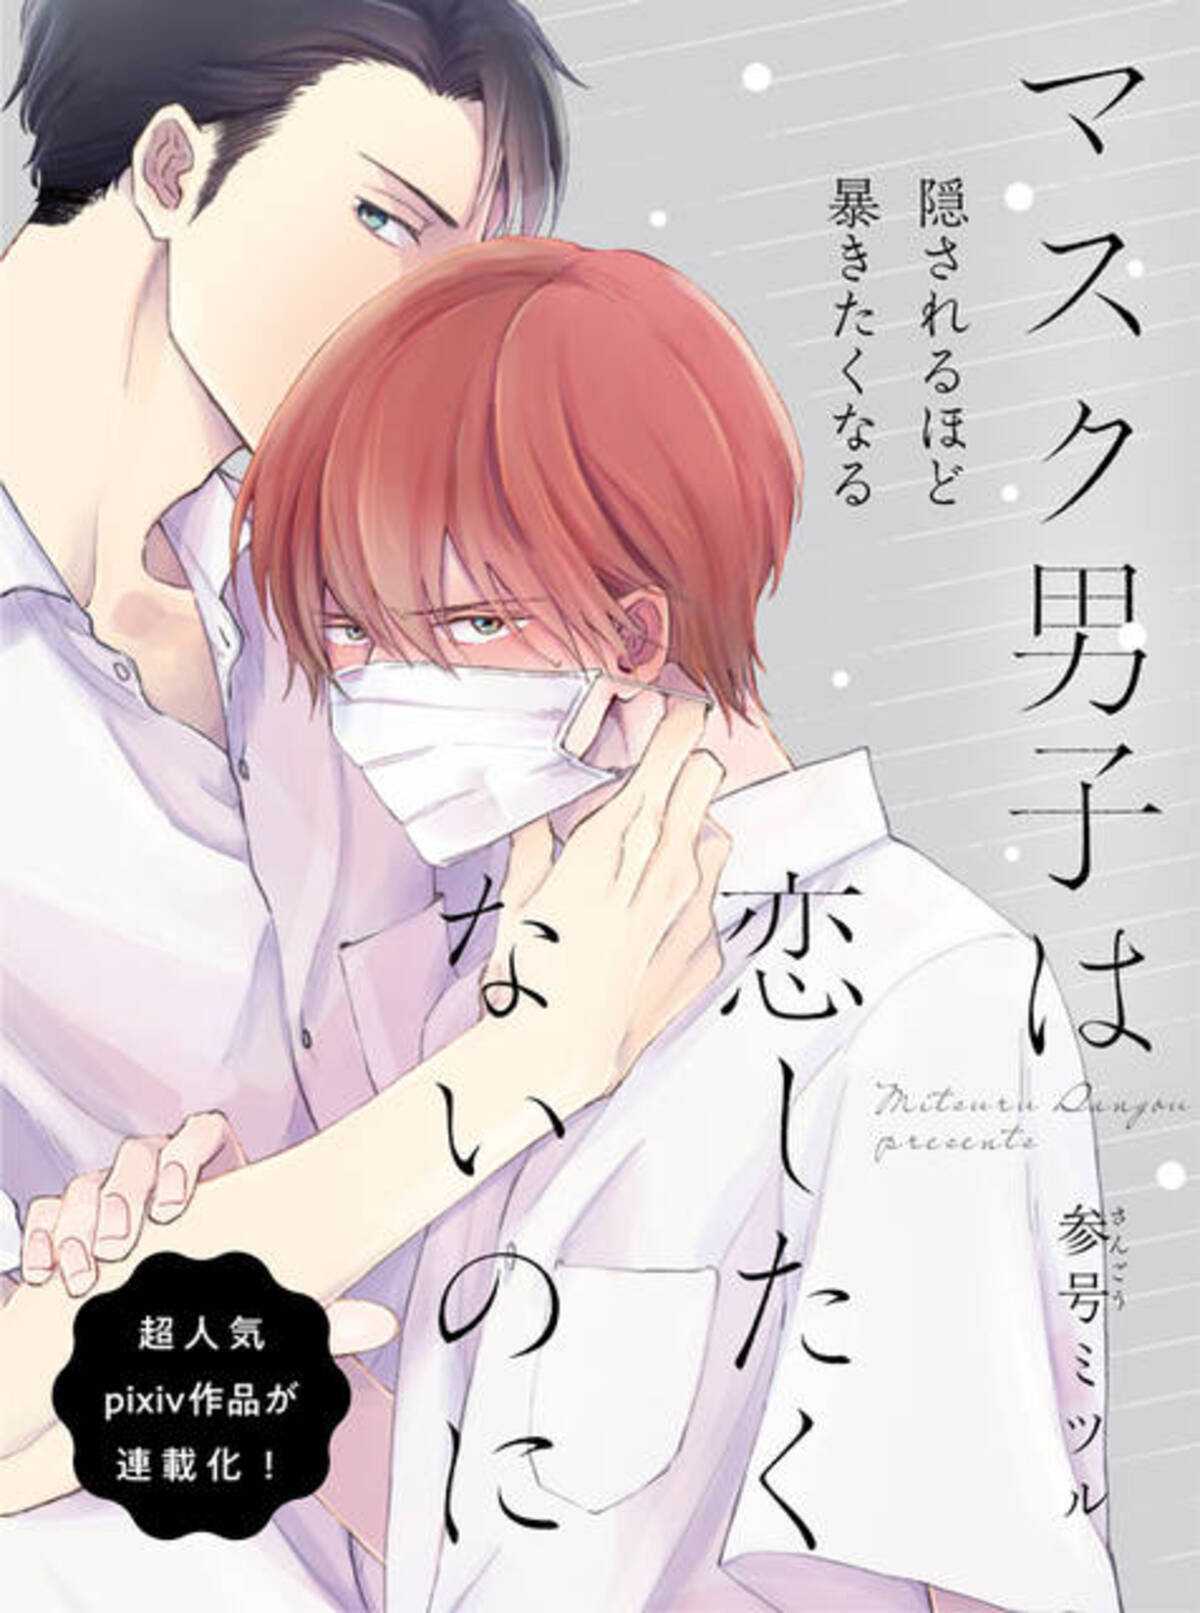 Which other BL Drama Series had such an amazing "kissing scenes with ...